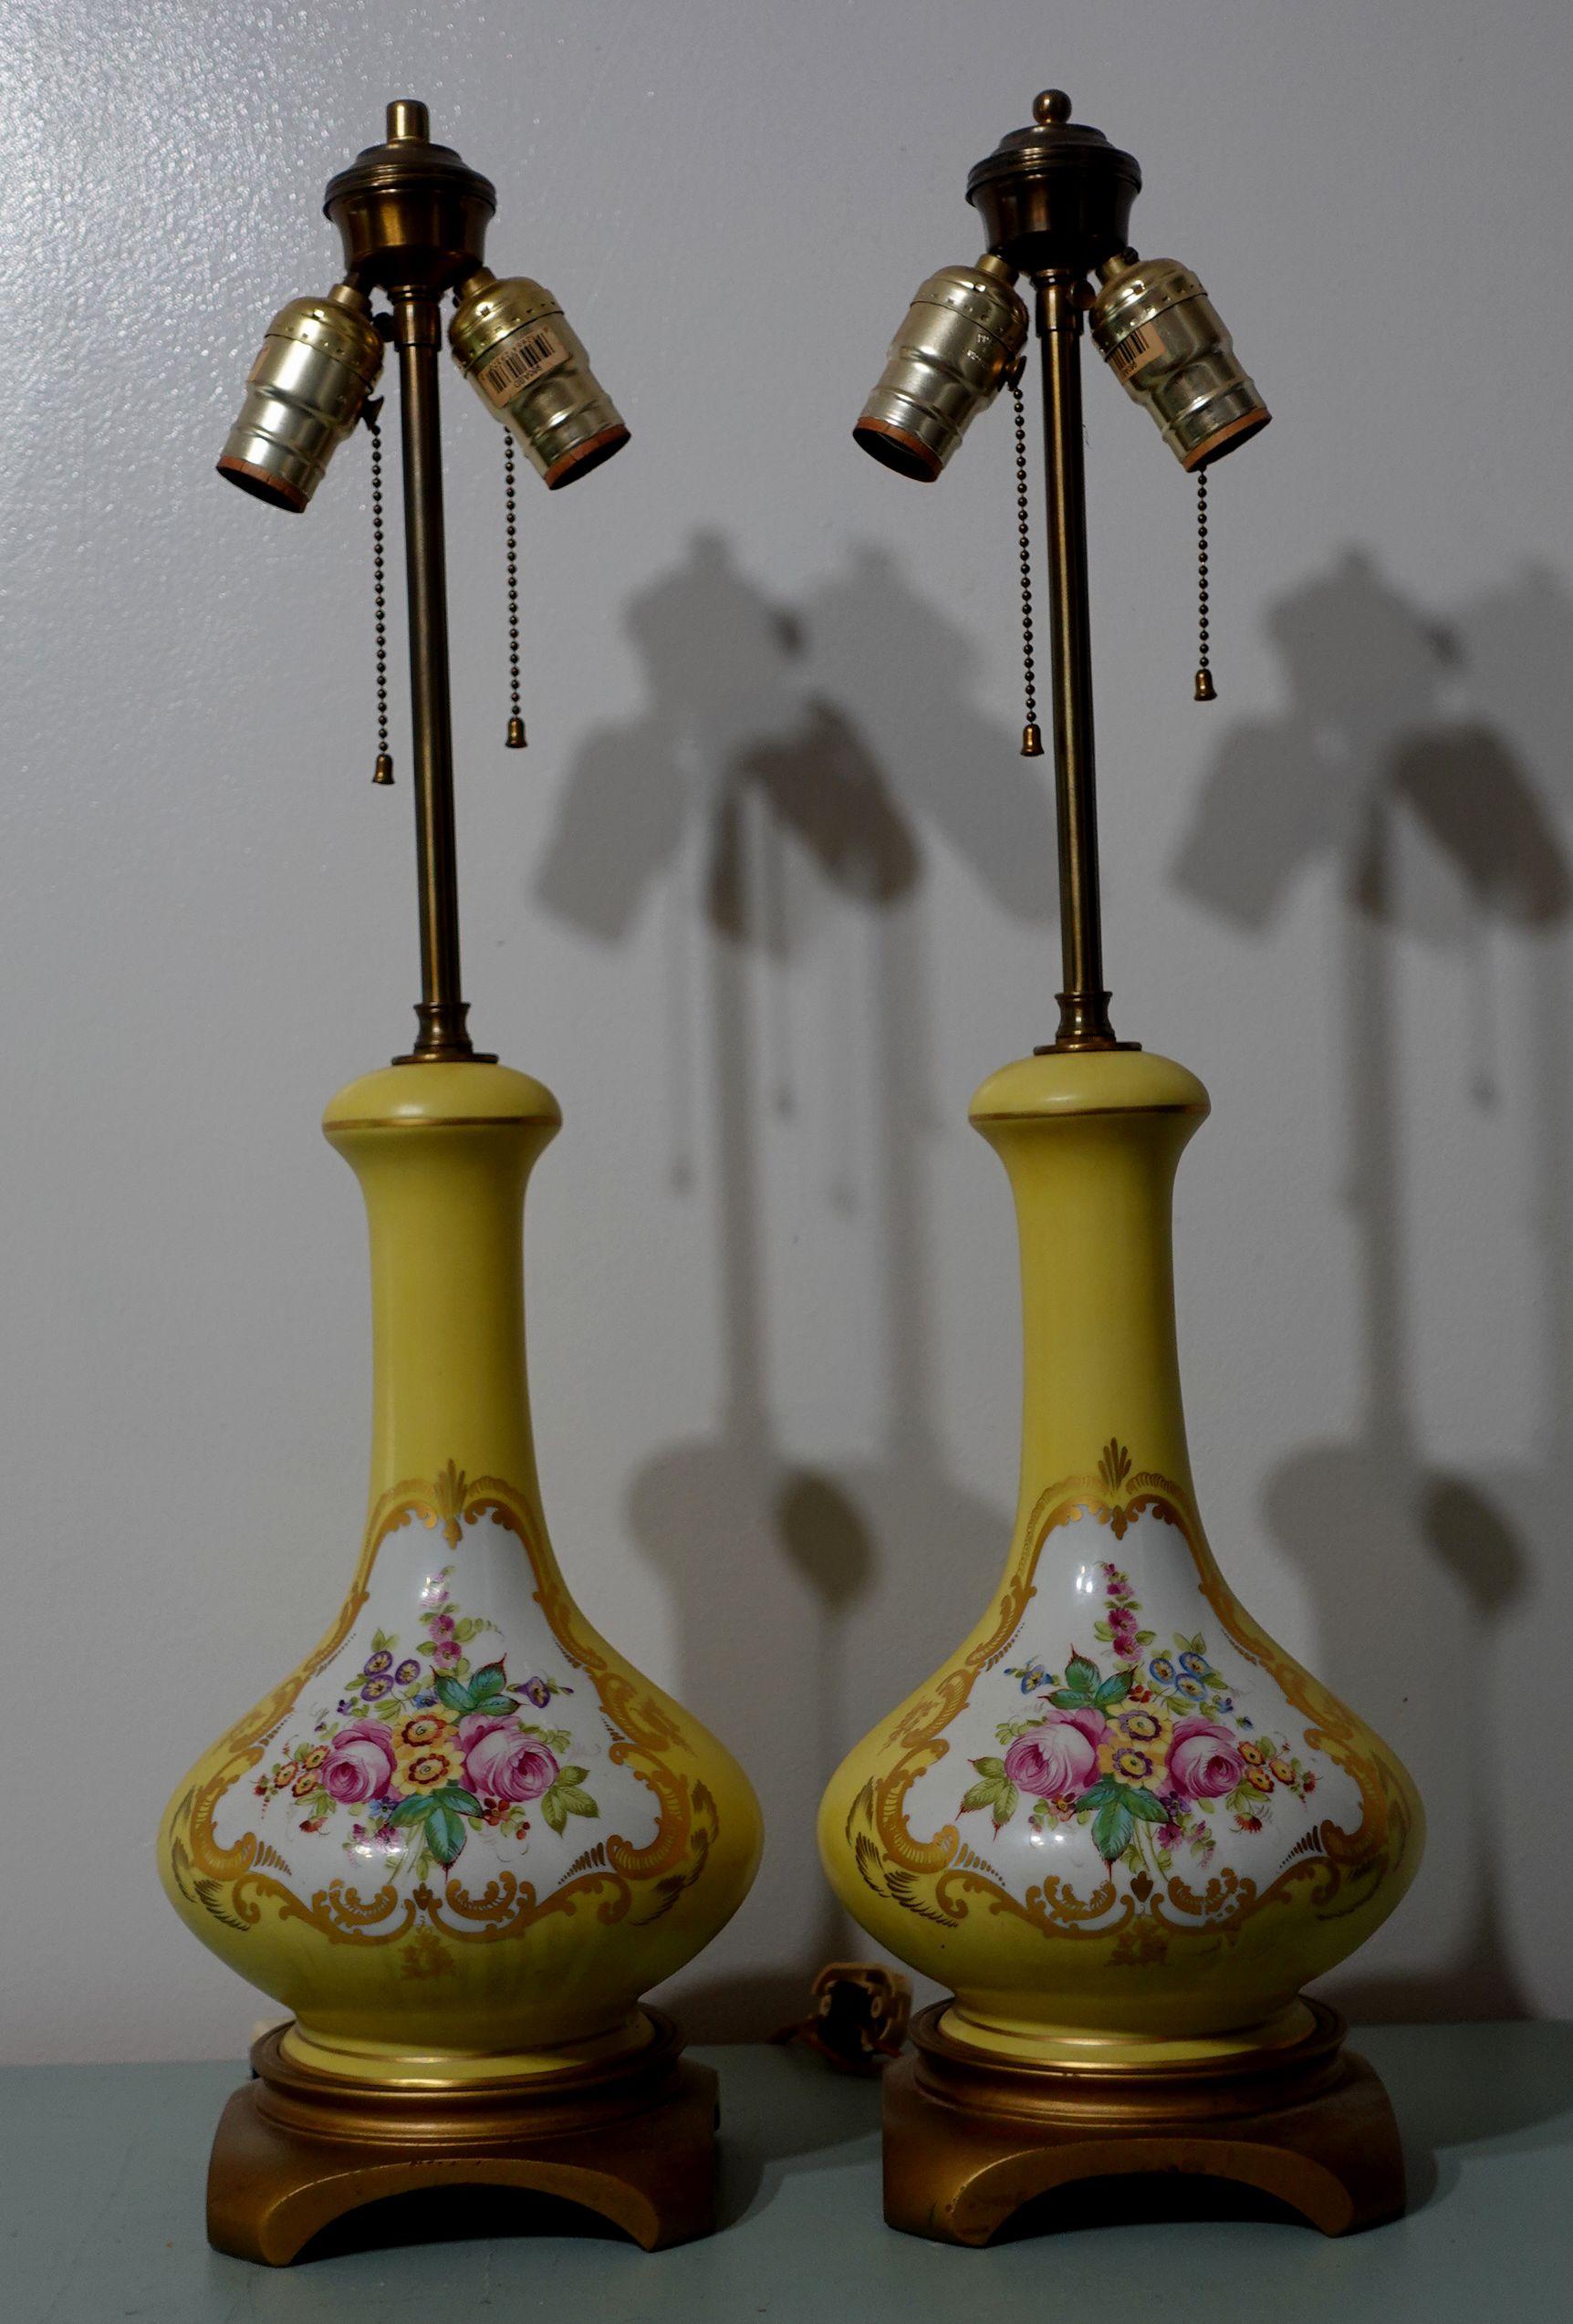 Early 20th Century
Beautiful pair of shapely porcelain body lamps decorated with central cartouche of pink roses and polychromatic flowers framed by gilt tendrils.
Good working condition, one light-switch cover lost.

Dimensions
Approx.26 1/2